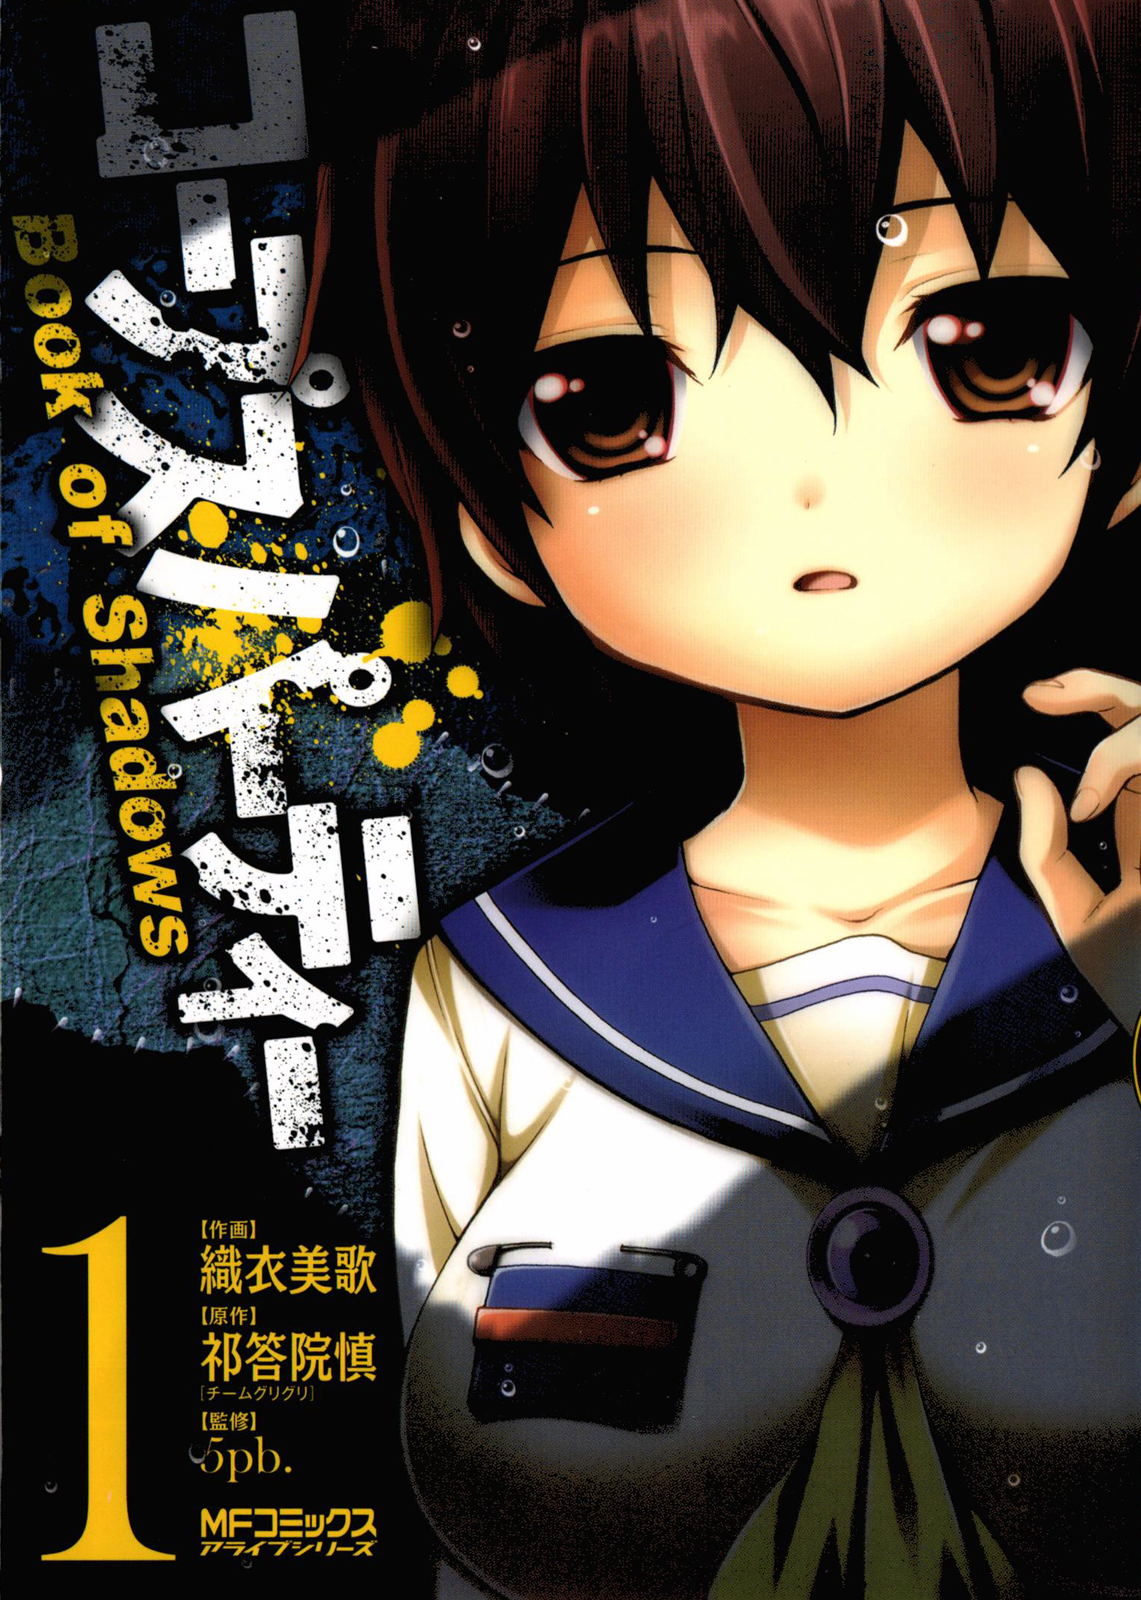 Corpse Party: Book of Shadows (Manga) | Corpse Party Wiki | Fandom